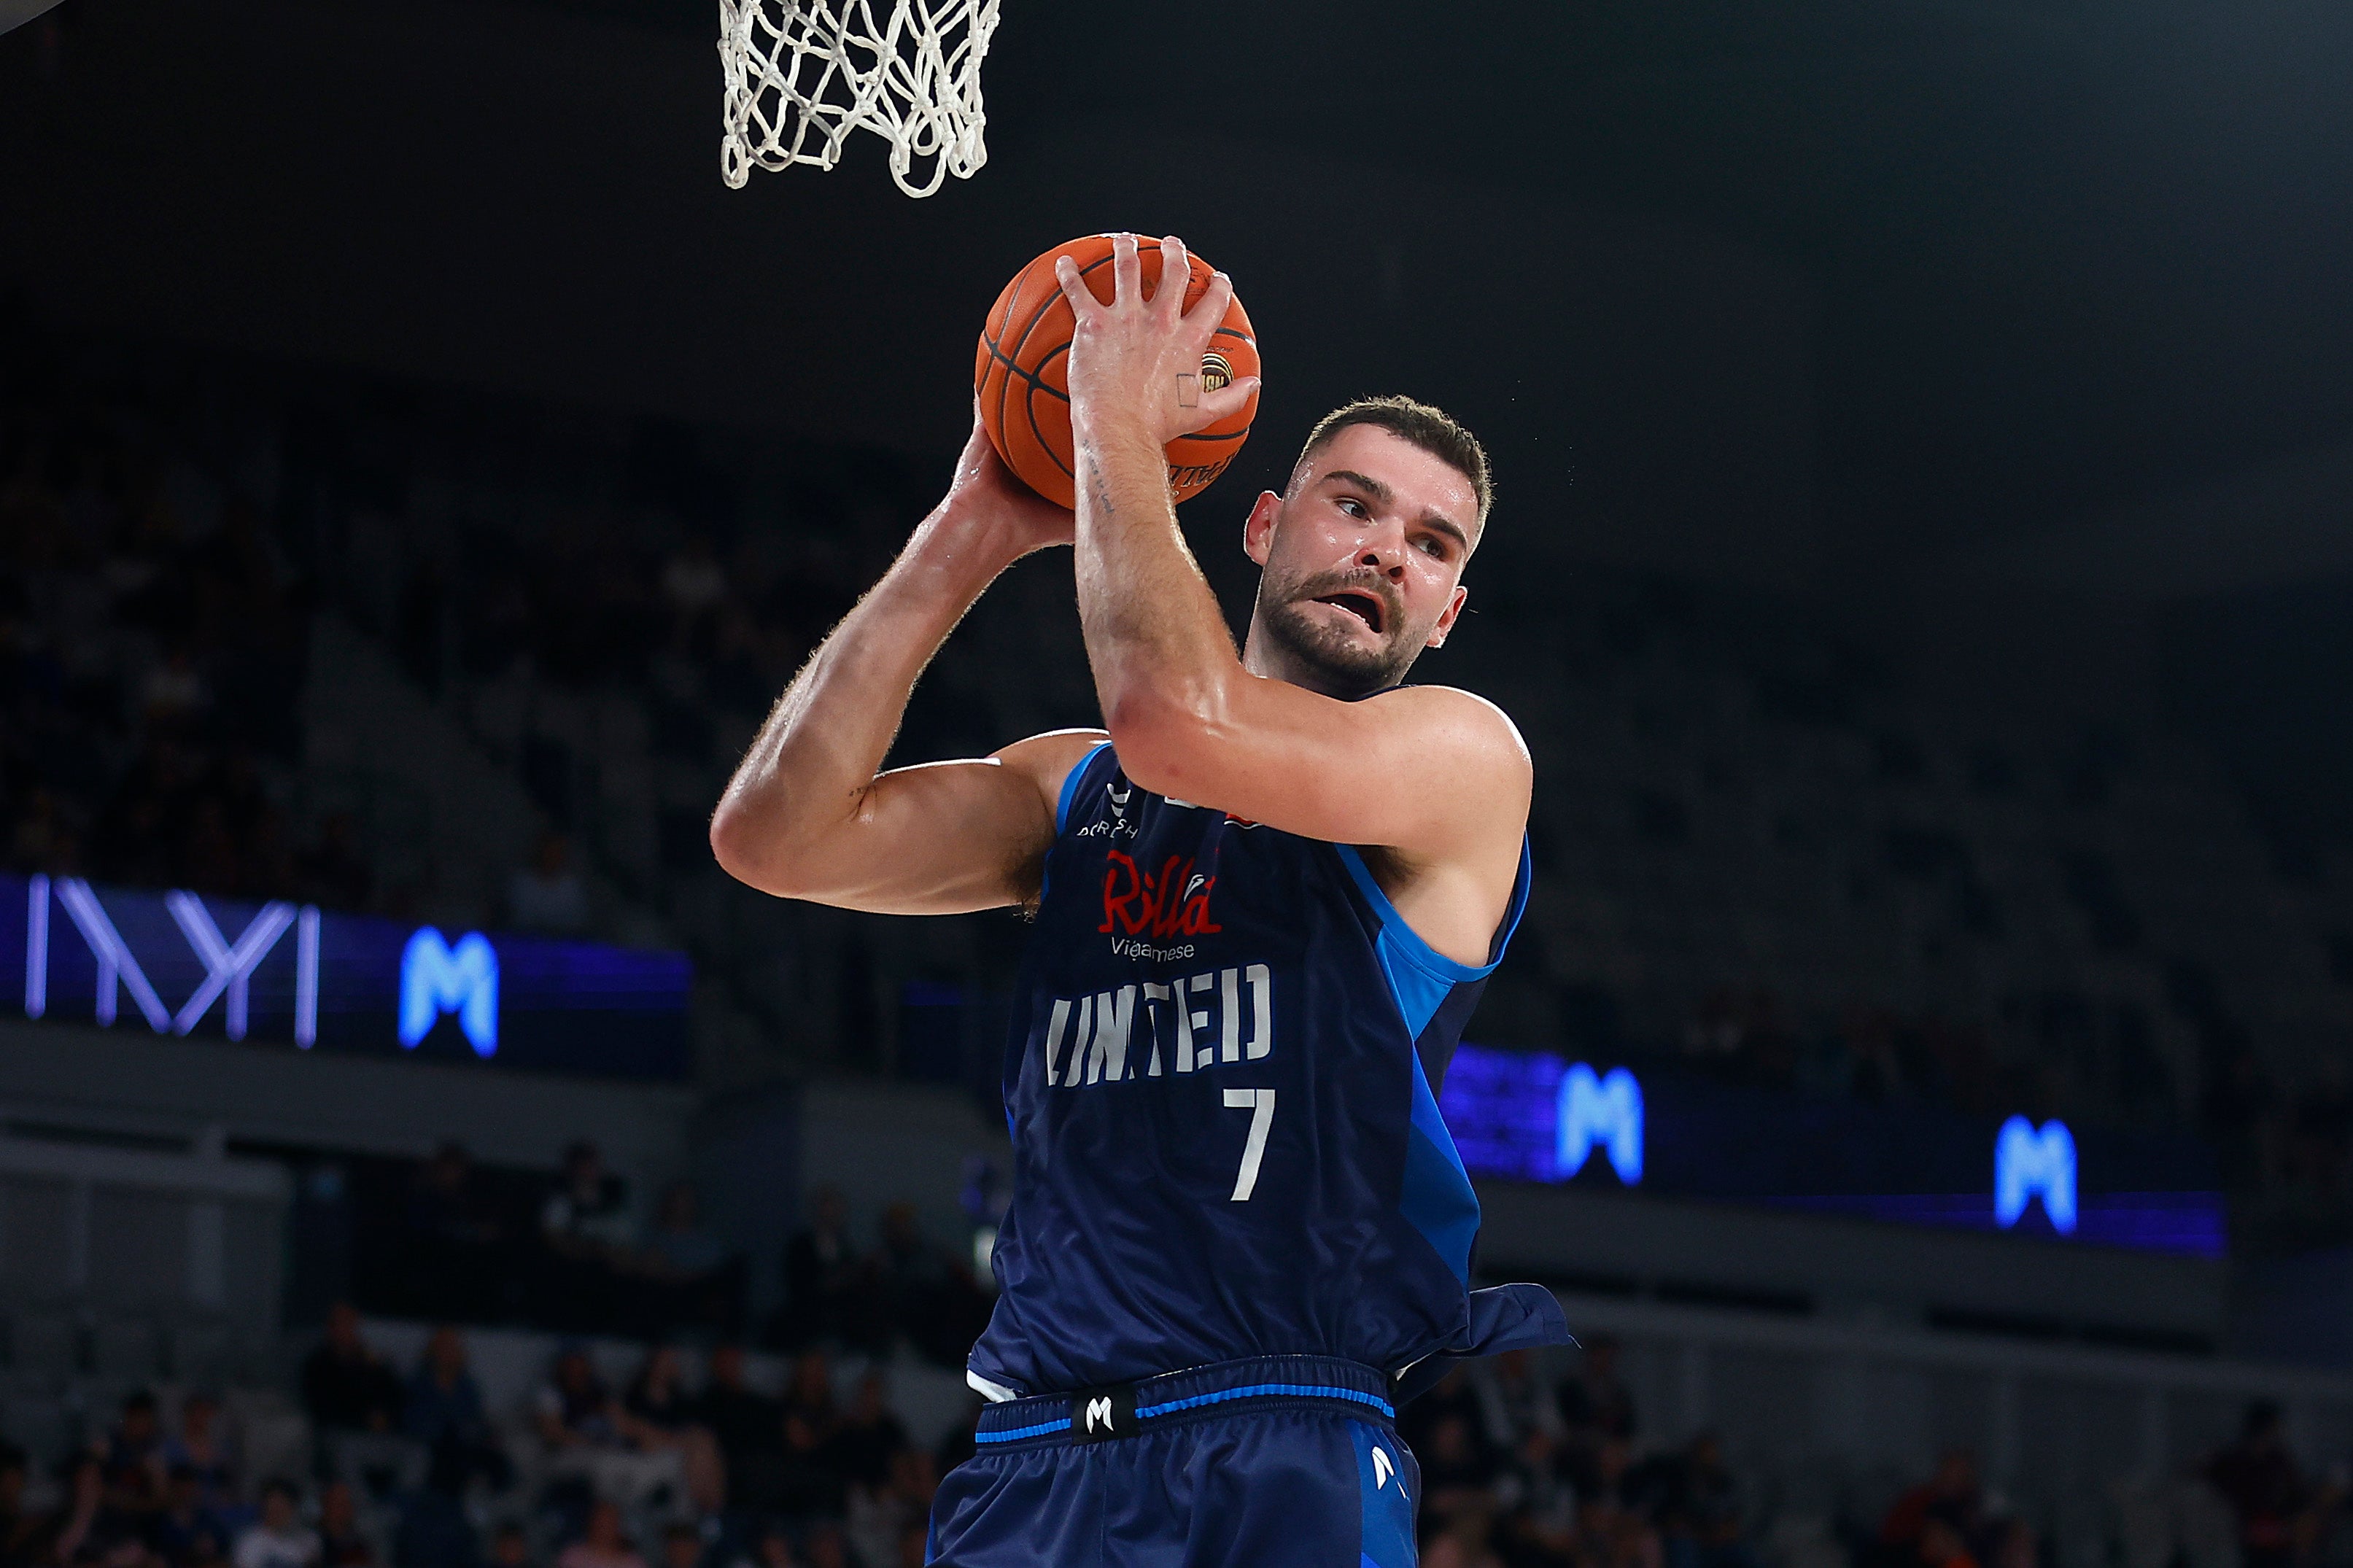 Isaac Humphries of United rebounds during a NBL match